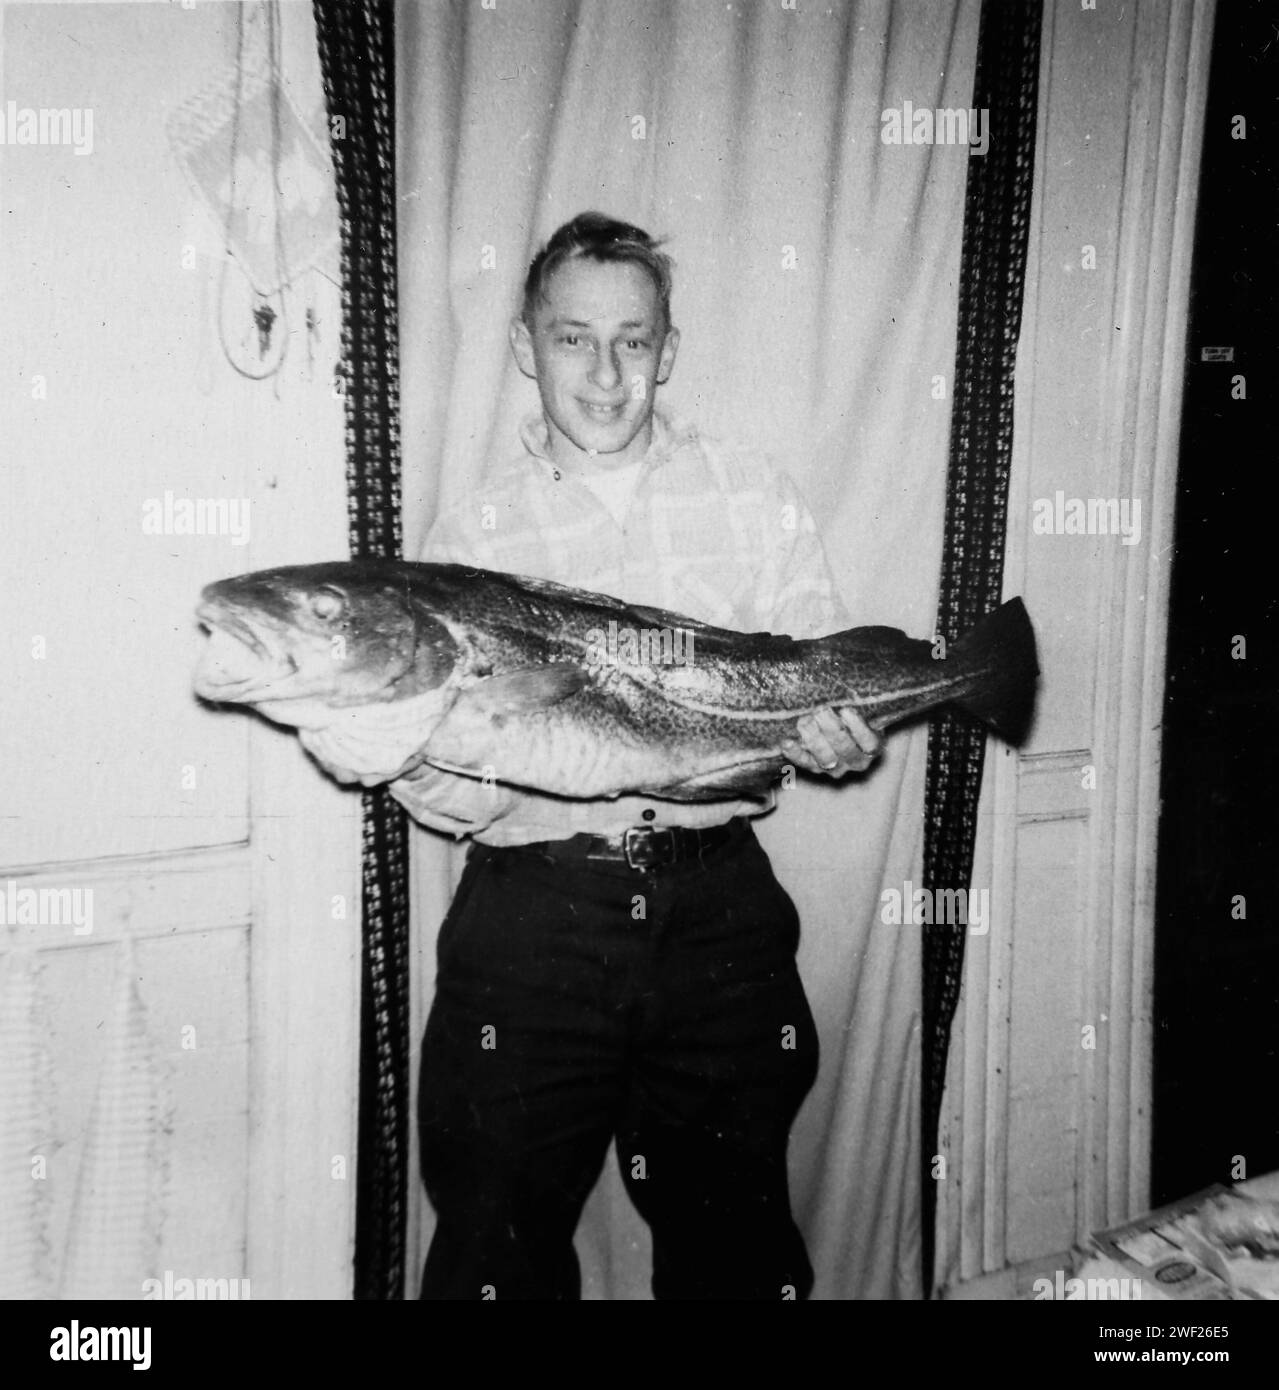 A man poses with his very large fish, ca. 1958 Stock Photo